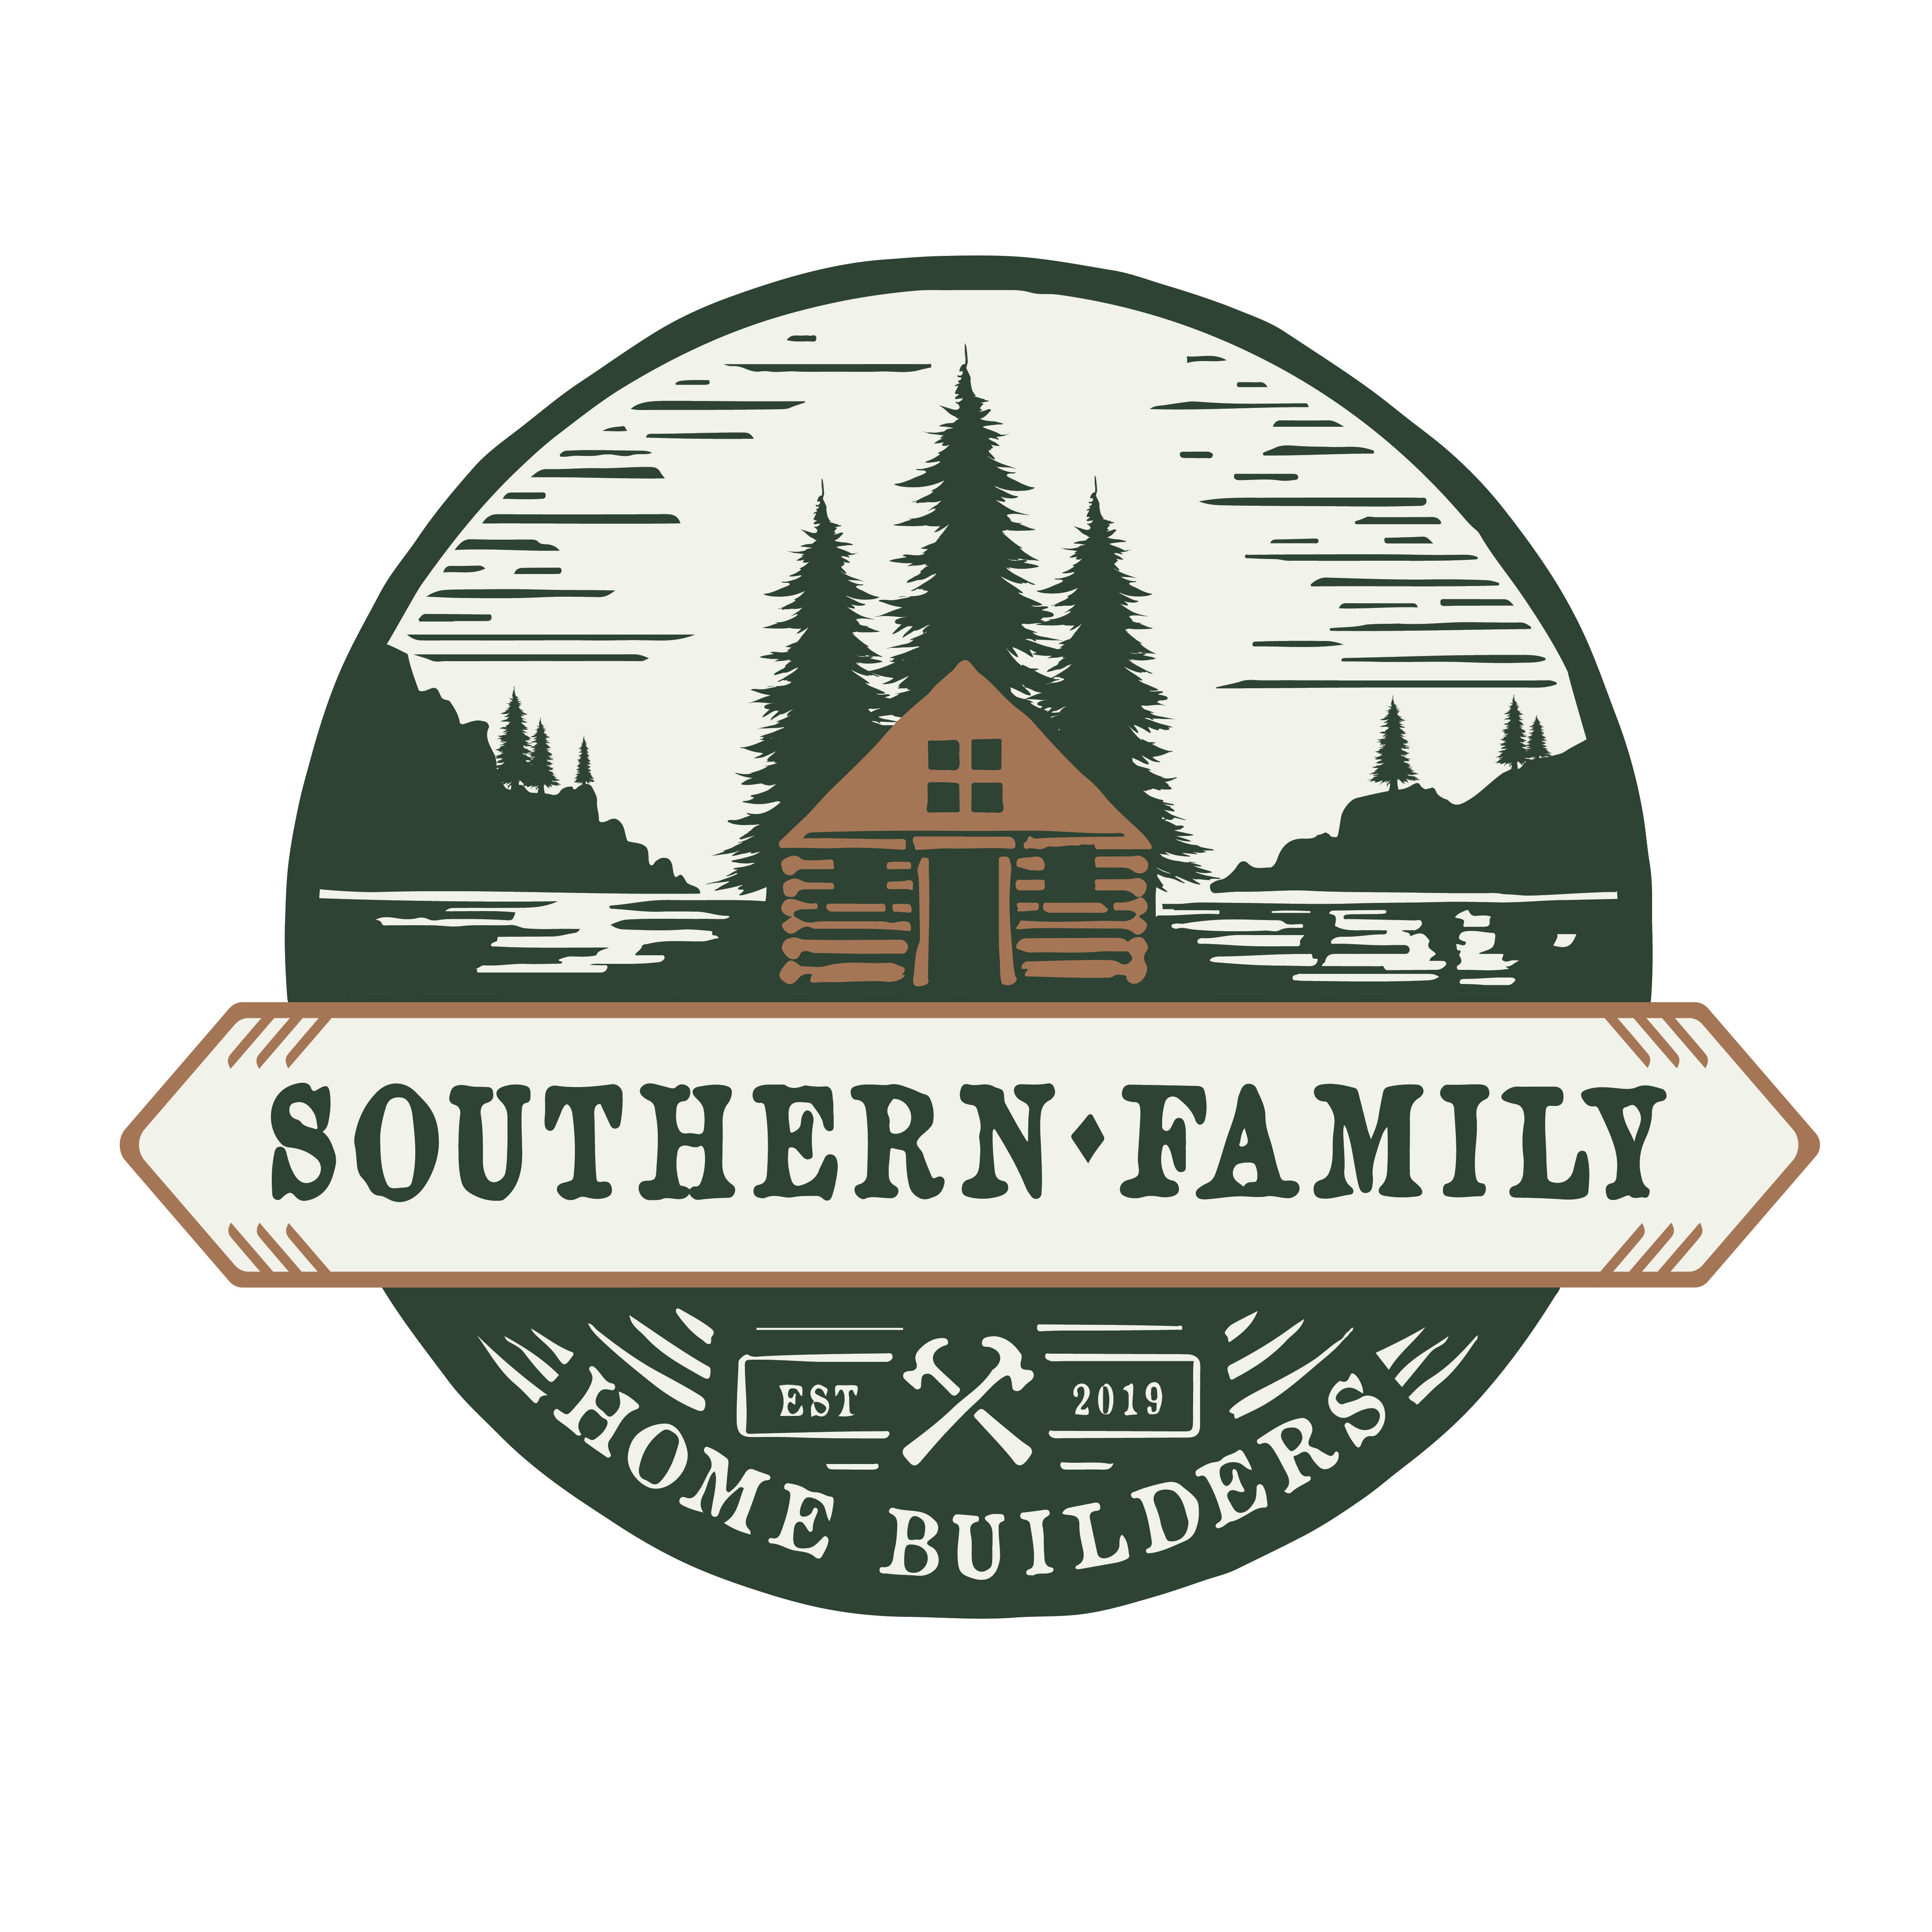 Southern Family Home Builders - Huntsville, AL 35811 - (256)397-3204 | ShowMeLocal.com